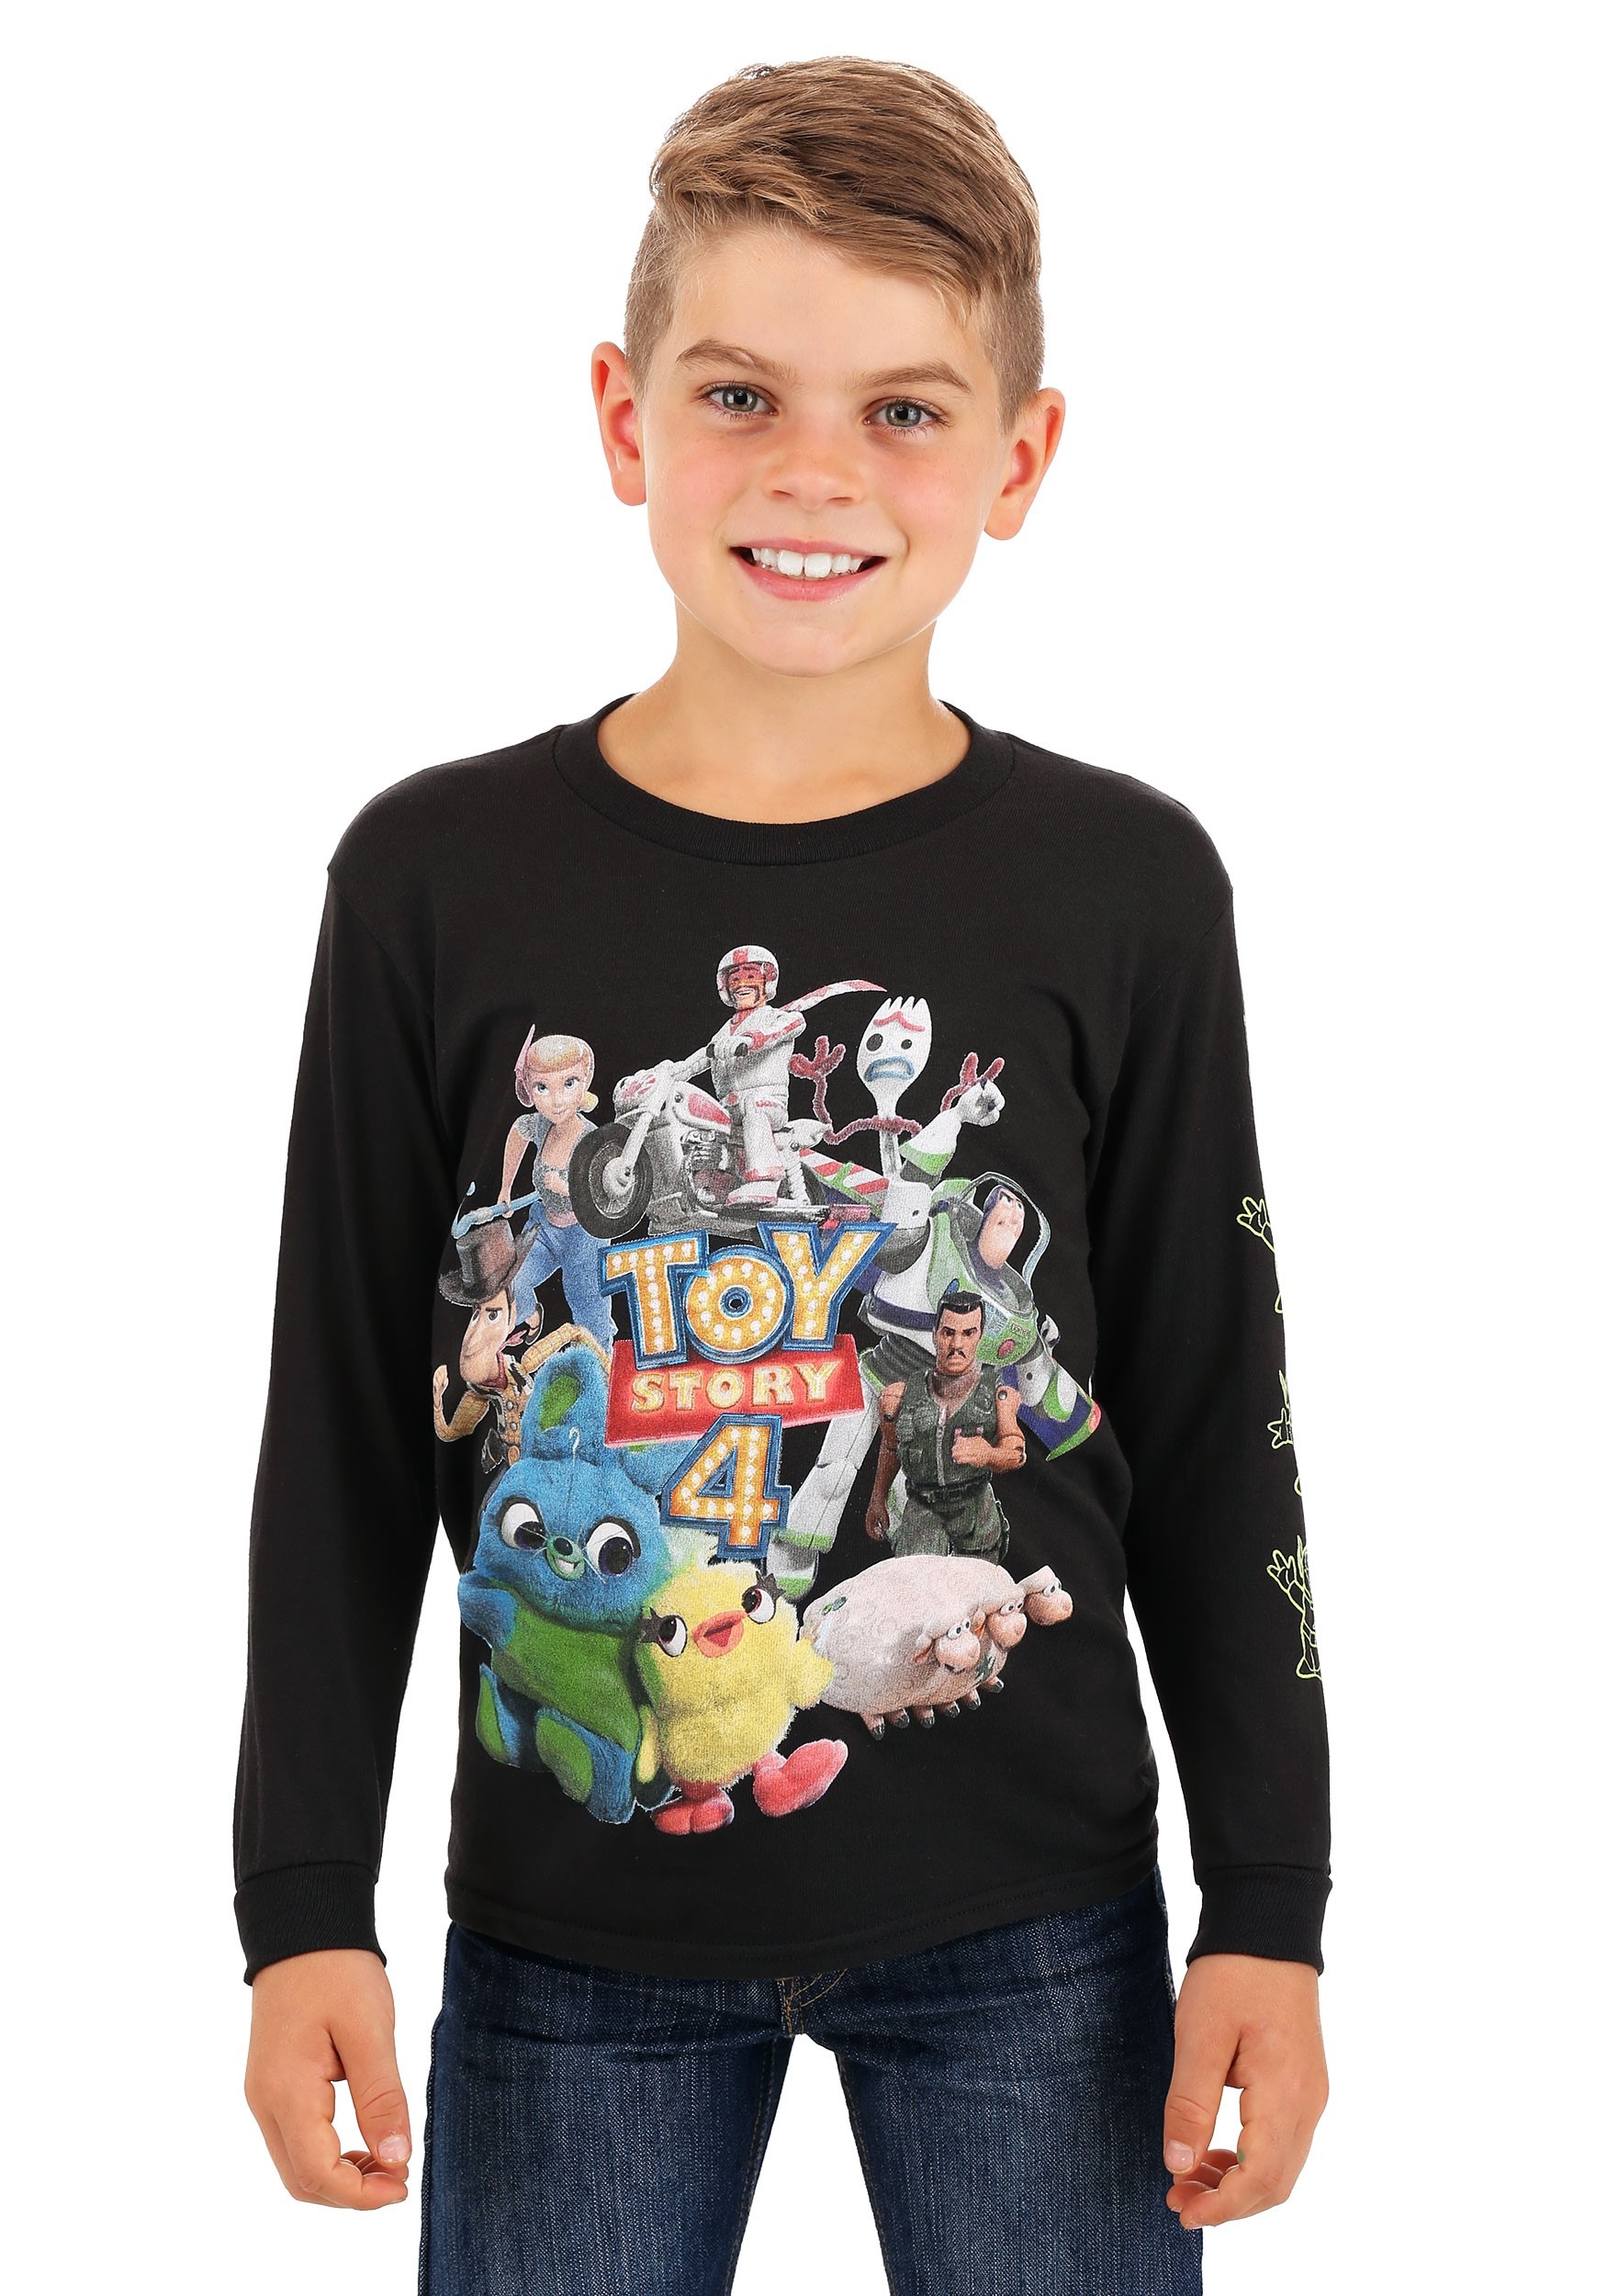 Toy Story 4 Character Group Long Sleeve Shirt for Boys